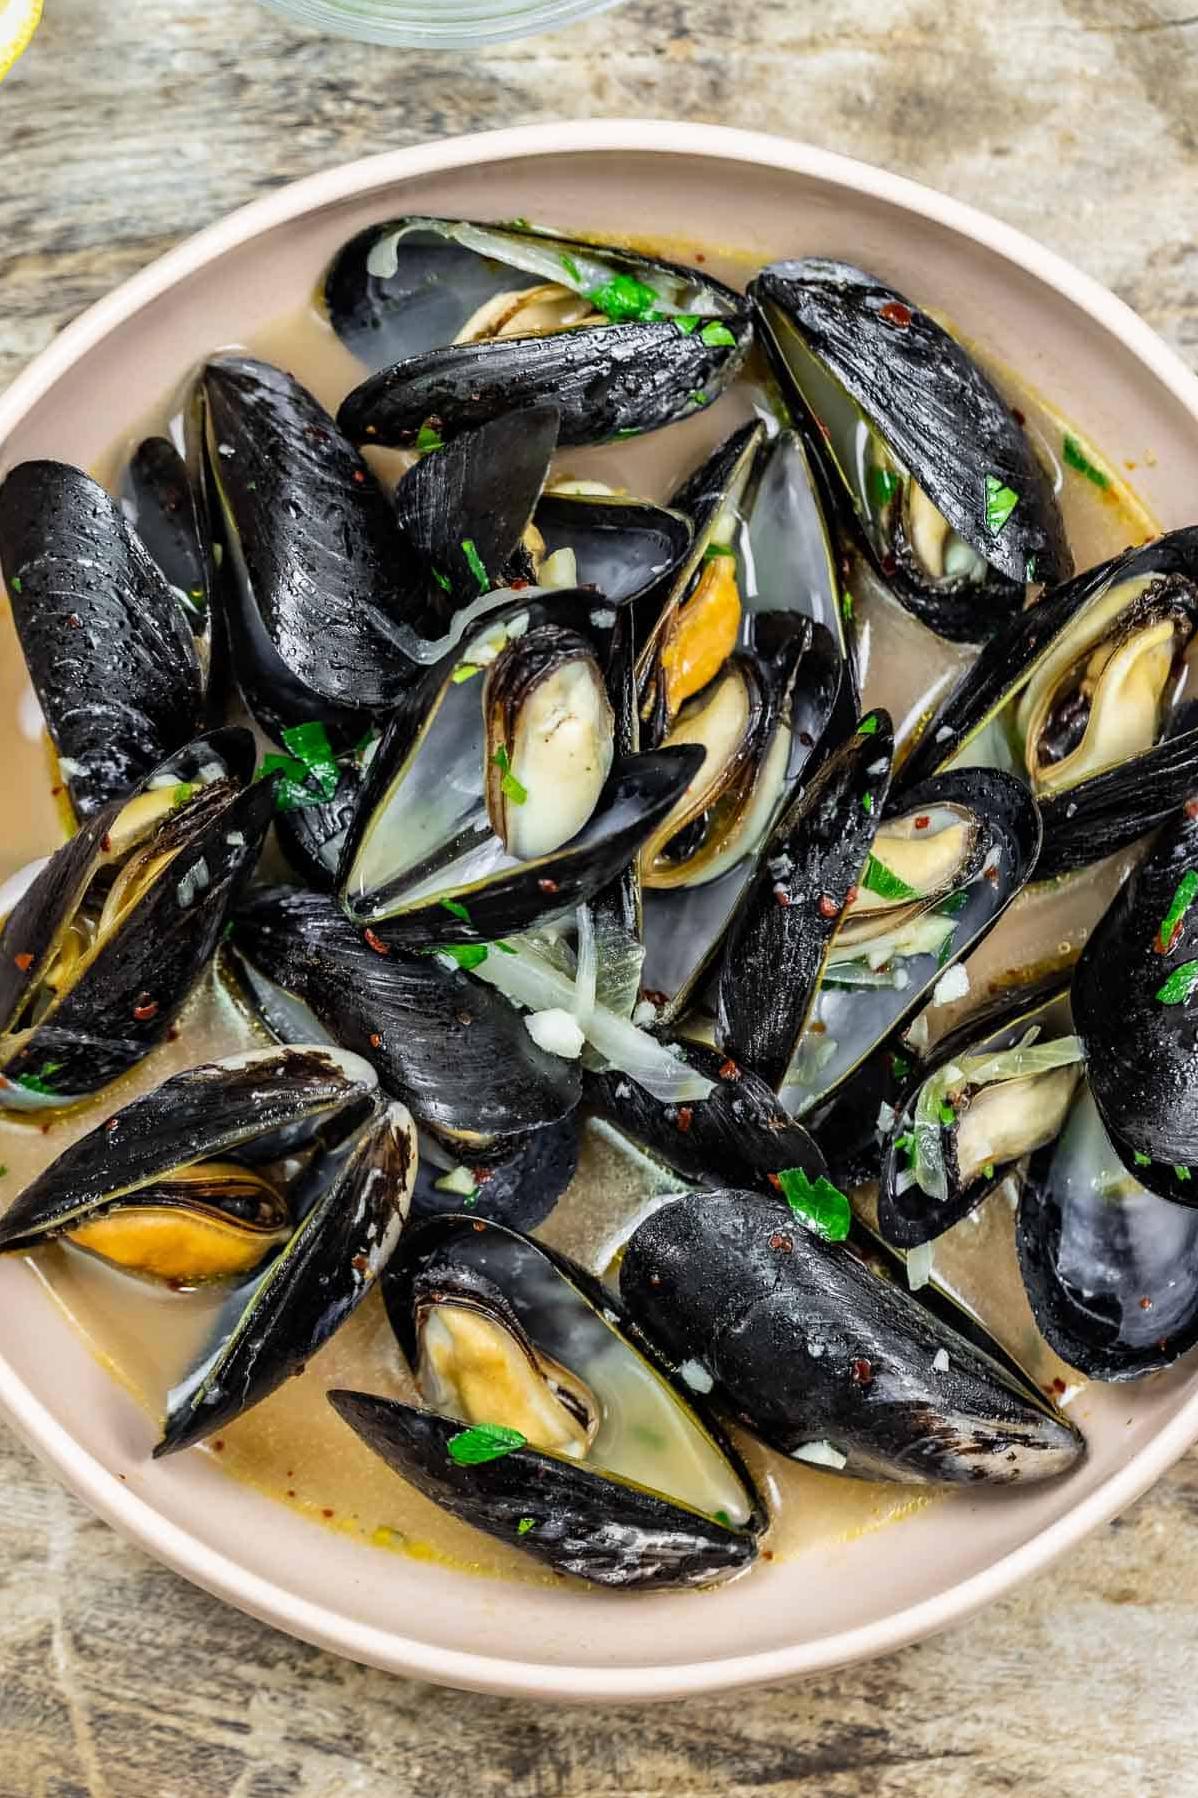  This recipe gives you the chance to enjoy restaurant-quality mussels right in the comfort of your home.